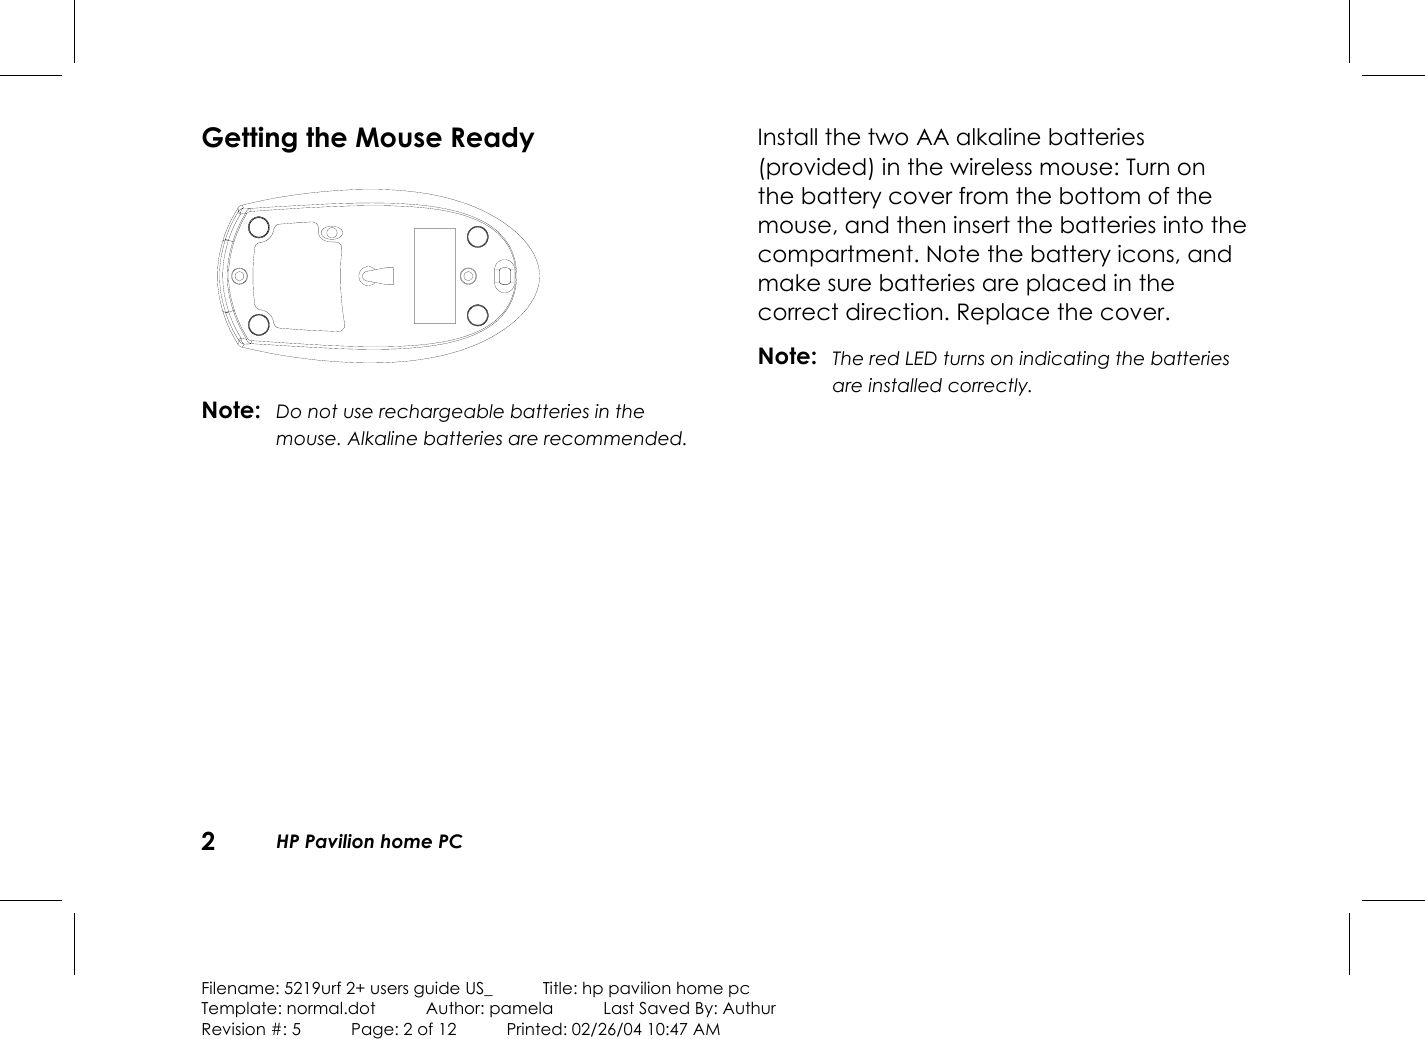 2HP Pavilion home PCFilename: 5219urf 2+ users guide US_            Title: hp pavilion home pcTemplate: normal.dot      Author: pamela      Last Saved By: AuthurRevision #: 5      Page: 2 of 12      Printed: 02/26/04 10:47 AMGetting the Mouse ReadyNote: Do not use rechargeable batteries in themouse. Alkaline batteries are recommended.Install the two AA alkaline batteries(provided) inthe wireless mouse: Turn onthebattery cover from the bottom of themouse, and then insert the batteries into thecompartment. Note the battery icons, andmake sure batteries are placed in thecorrect direction. Replace the cover.Note: The red LED turns on indicating the batteriesare installed correctly.